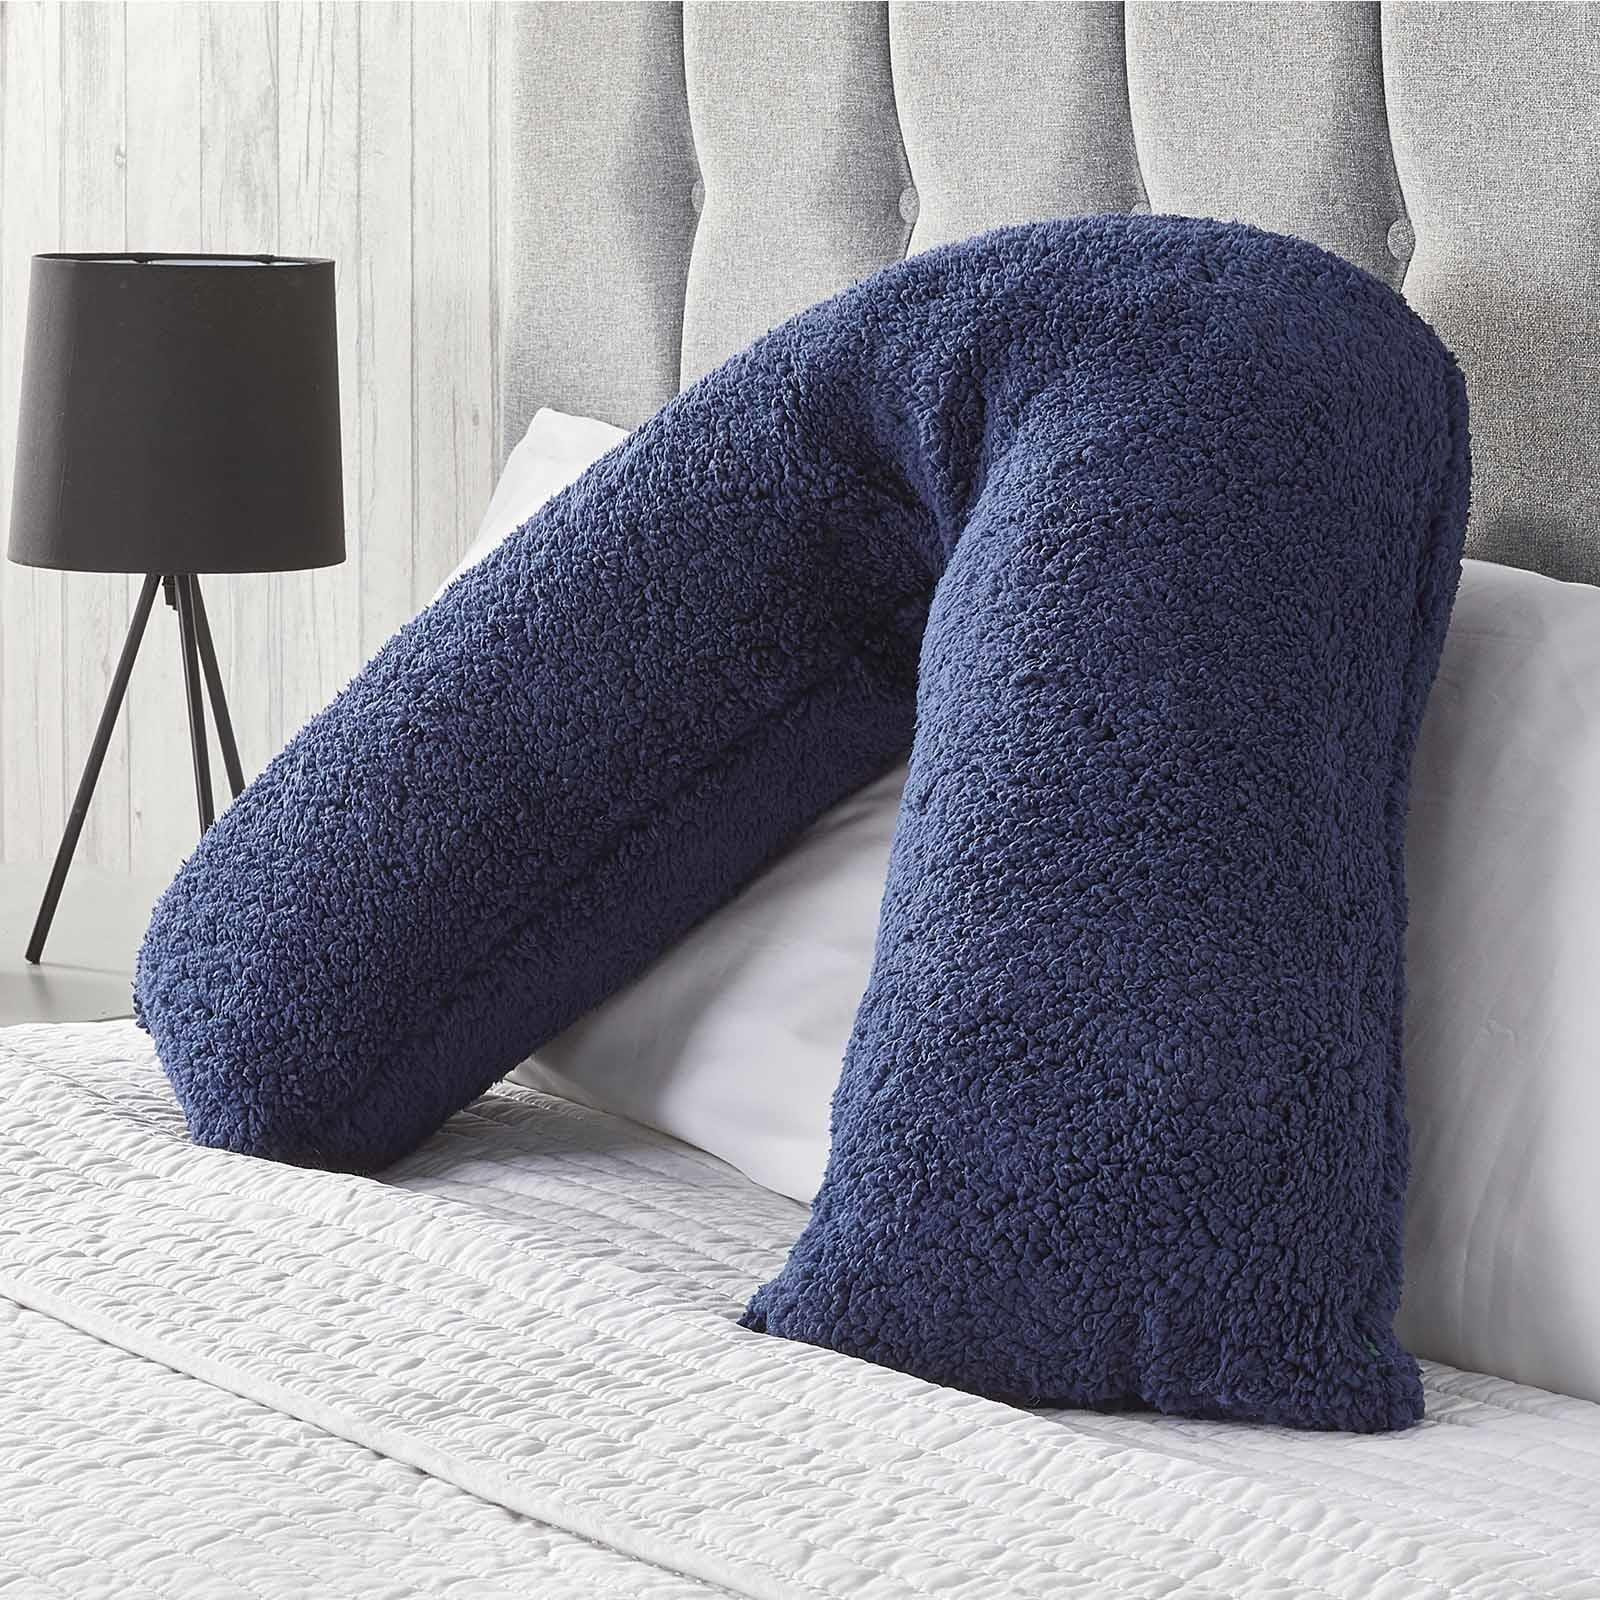 Teddy Fleece V Shaped Pillow Support Pregnancy Orthopaedic Cushion - image 1